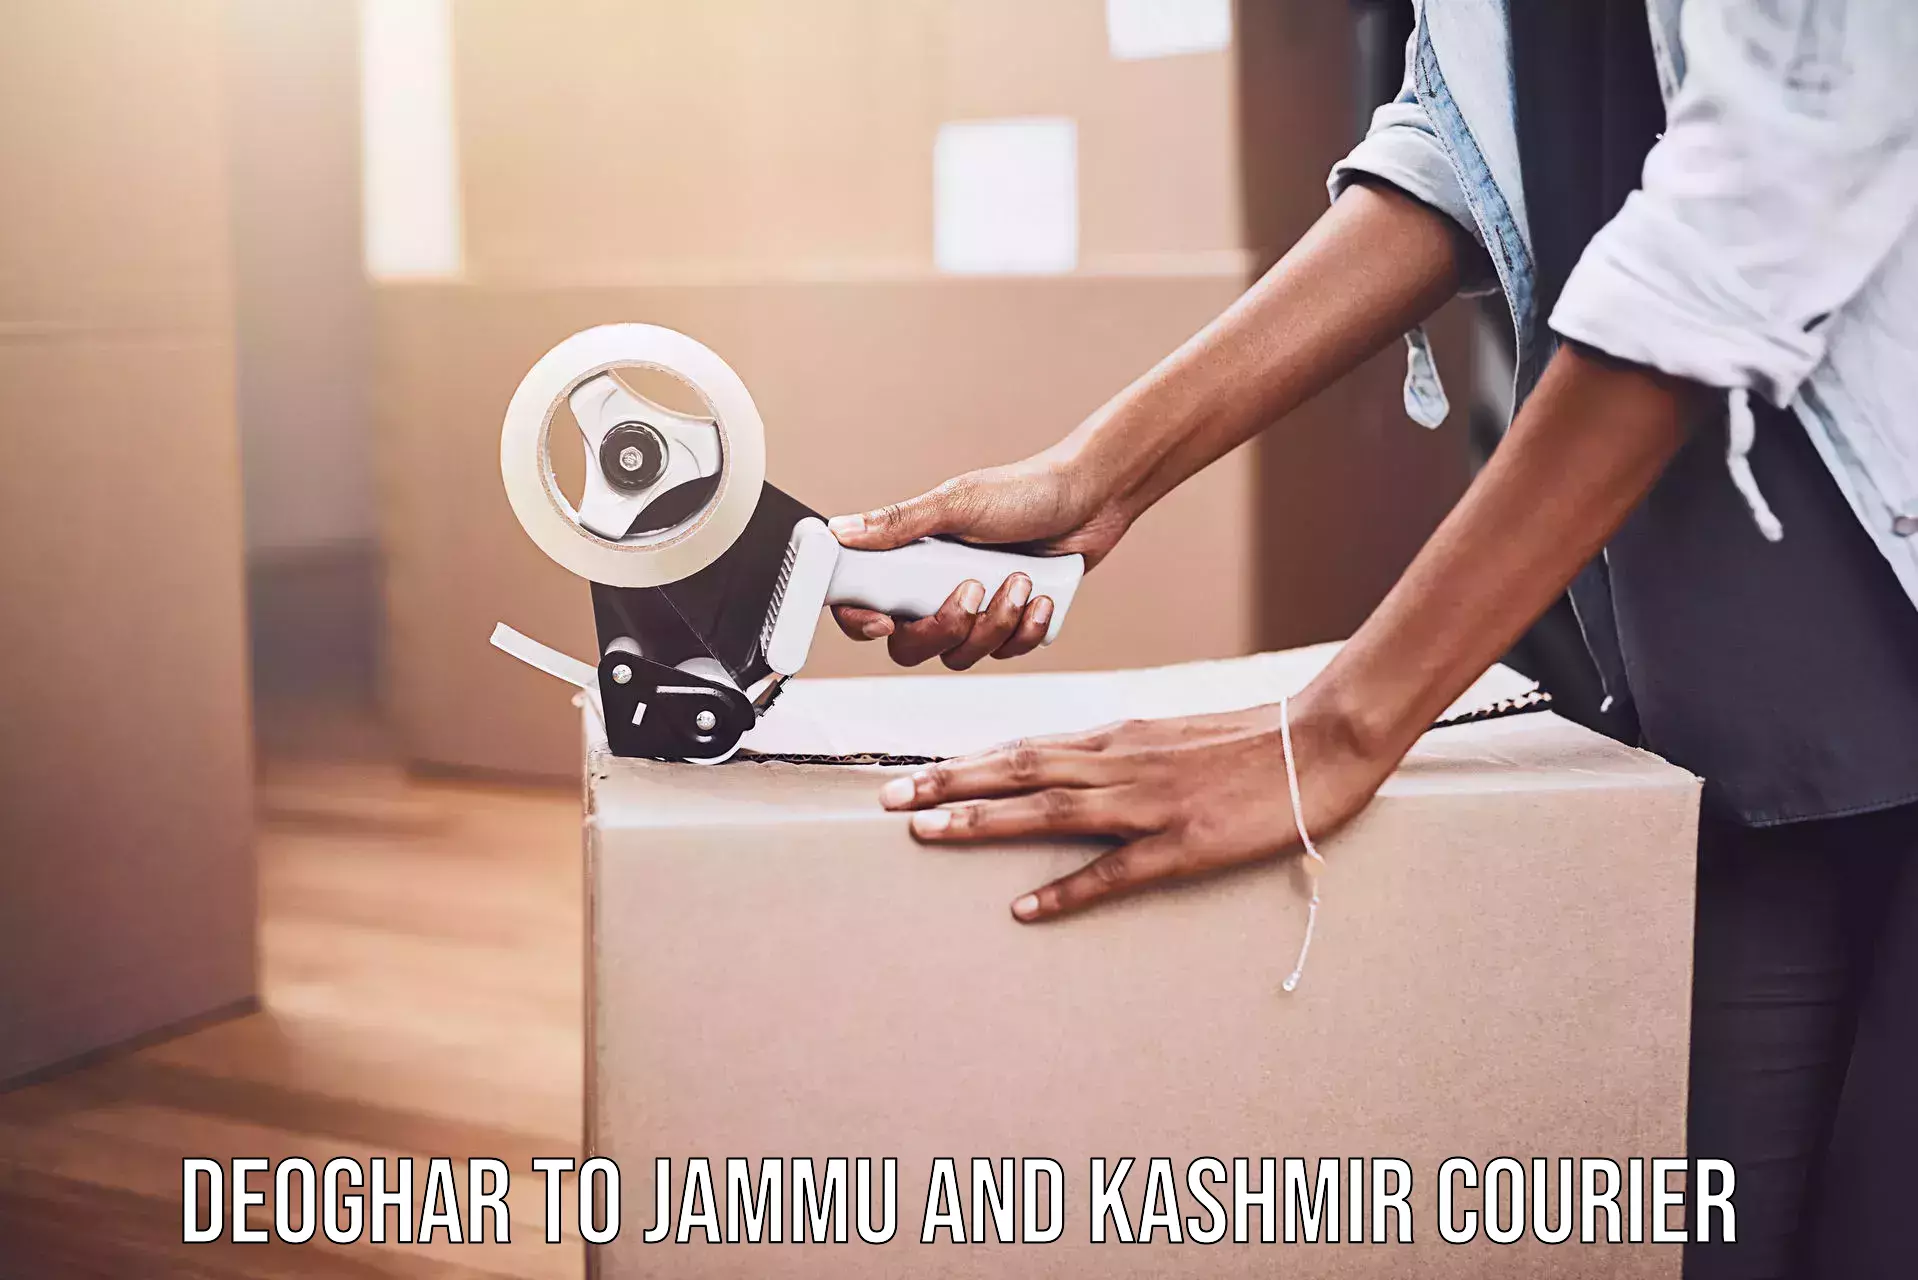 Courier app Deoghar to Baramulla